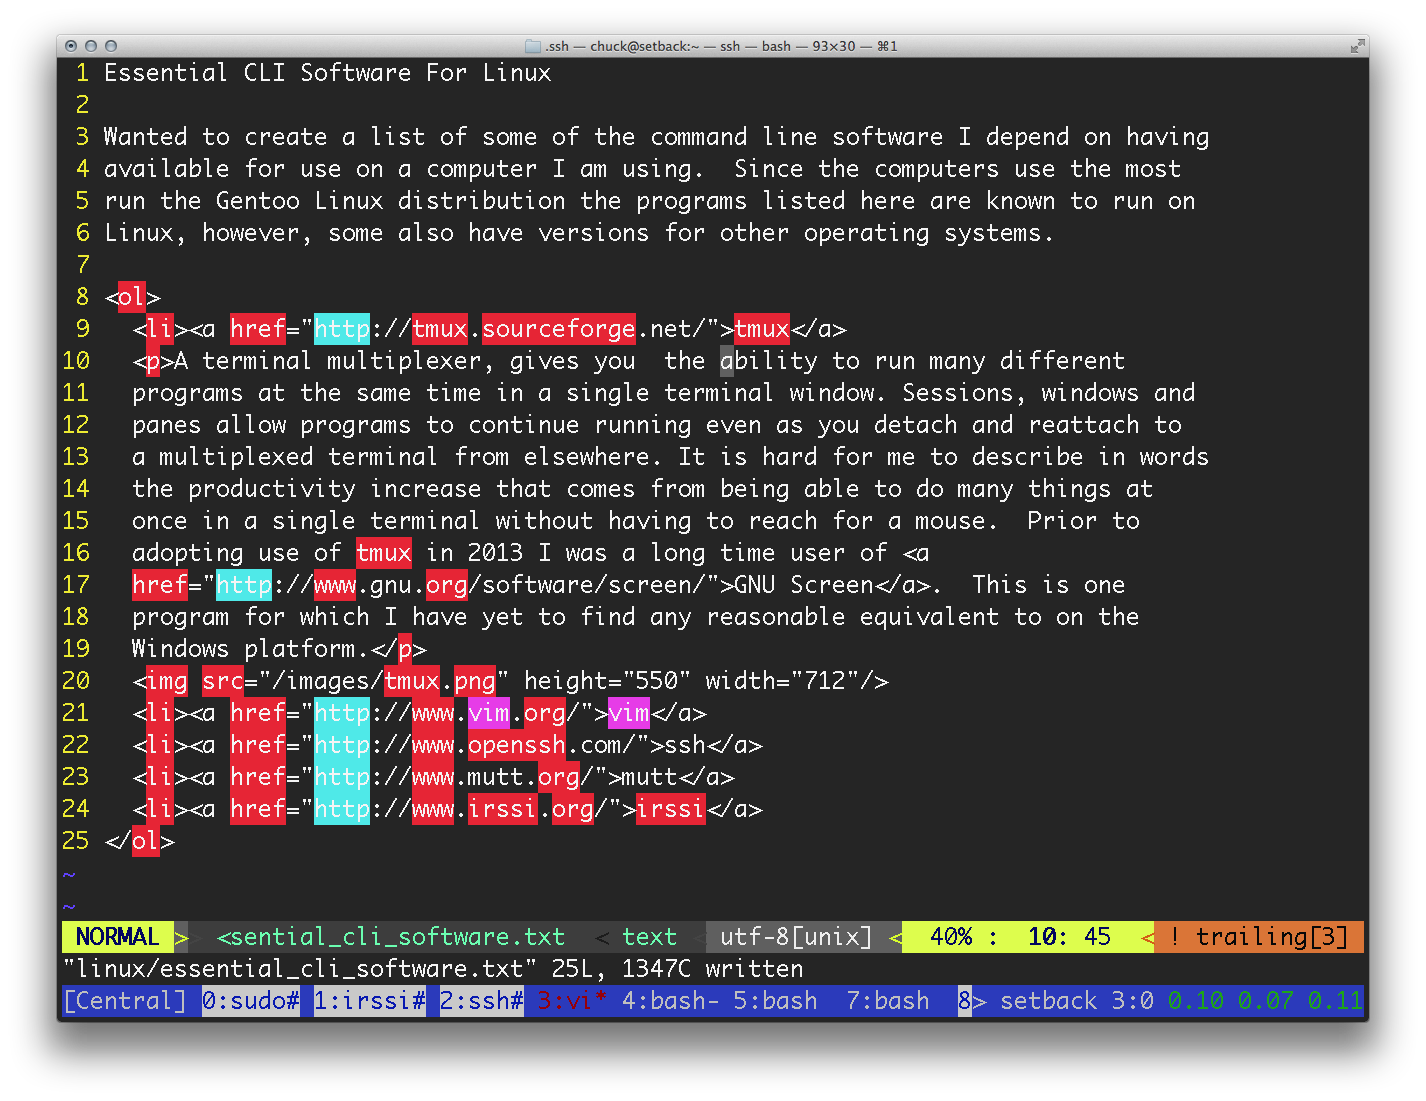 tmux in use